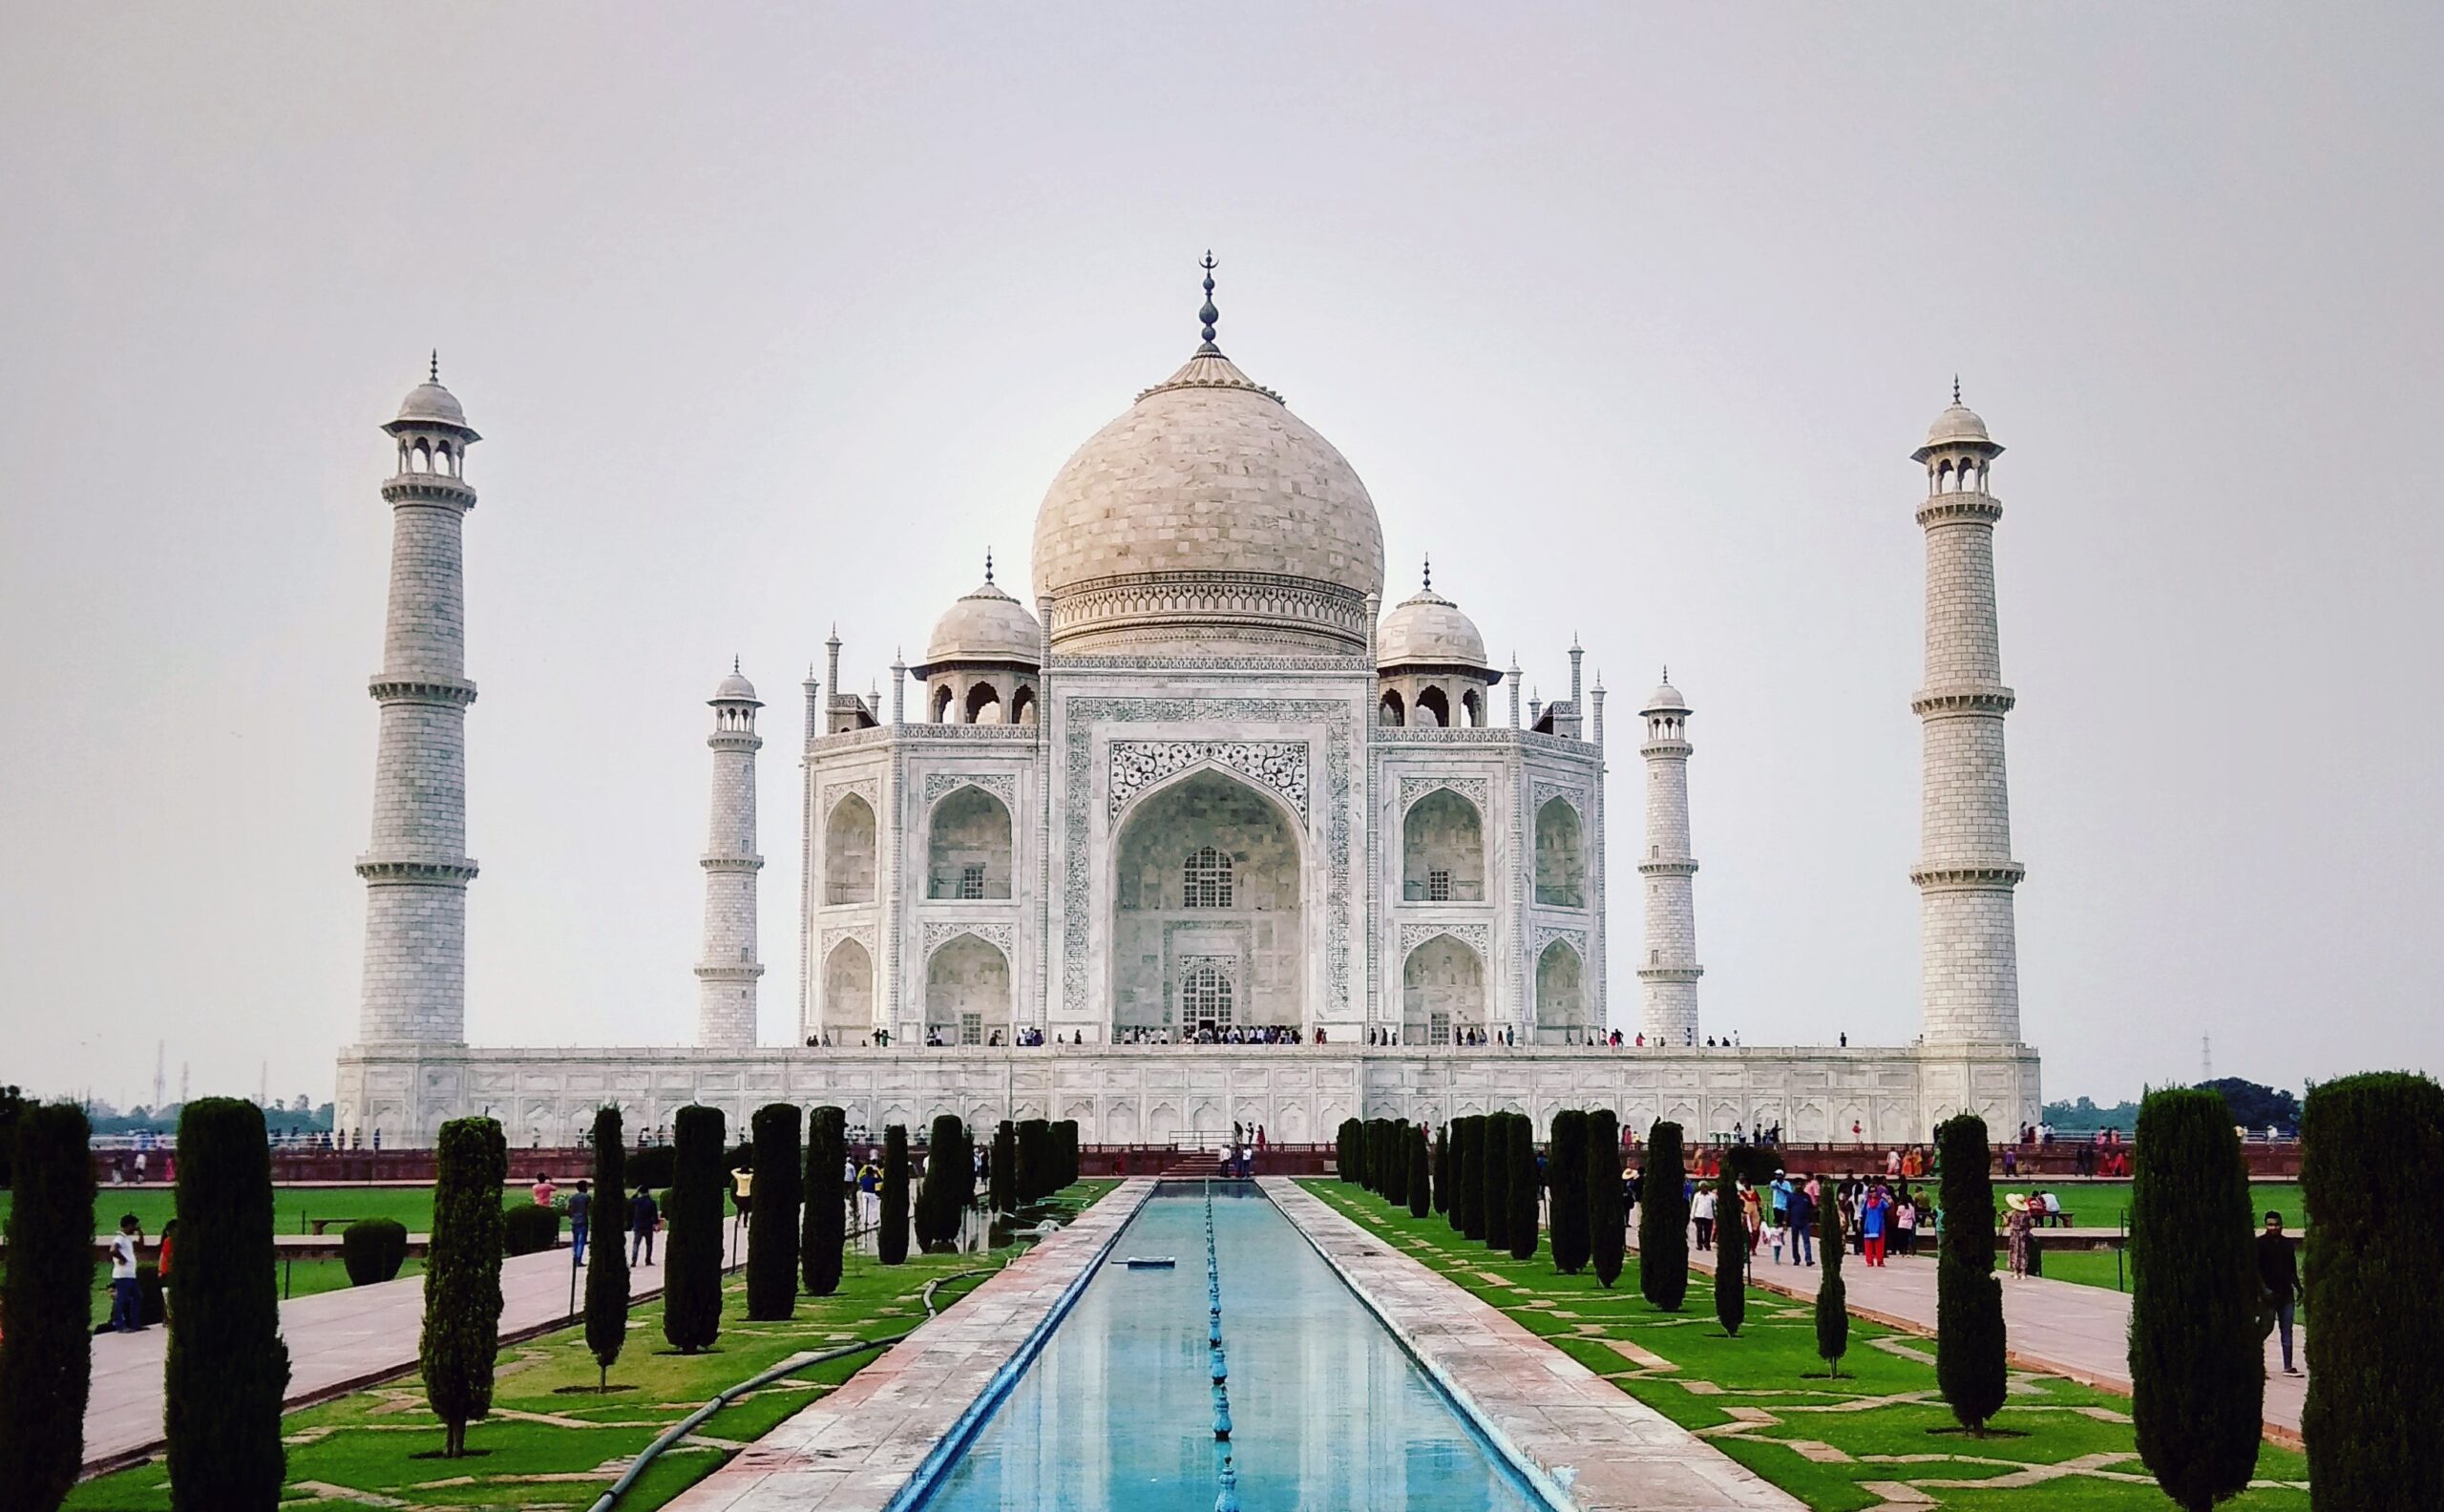 Places To Visit in Agra